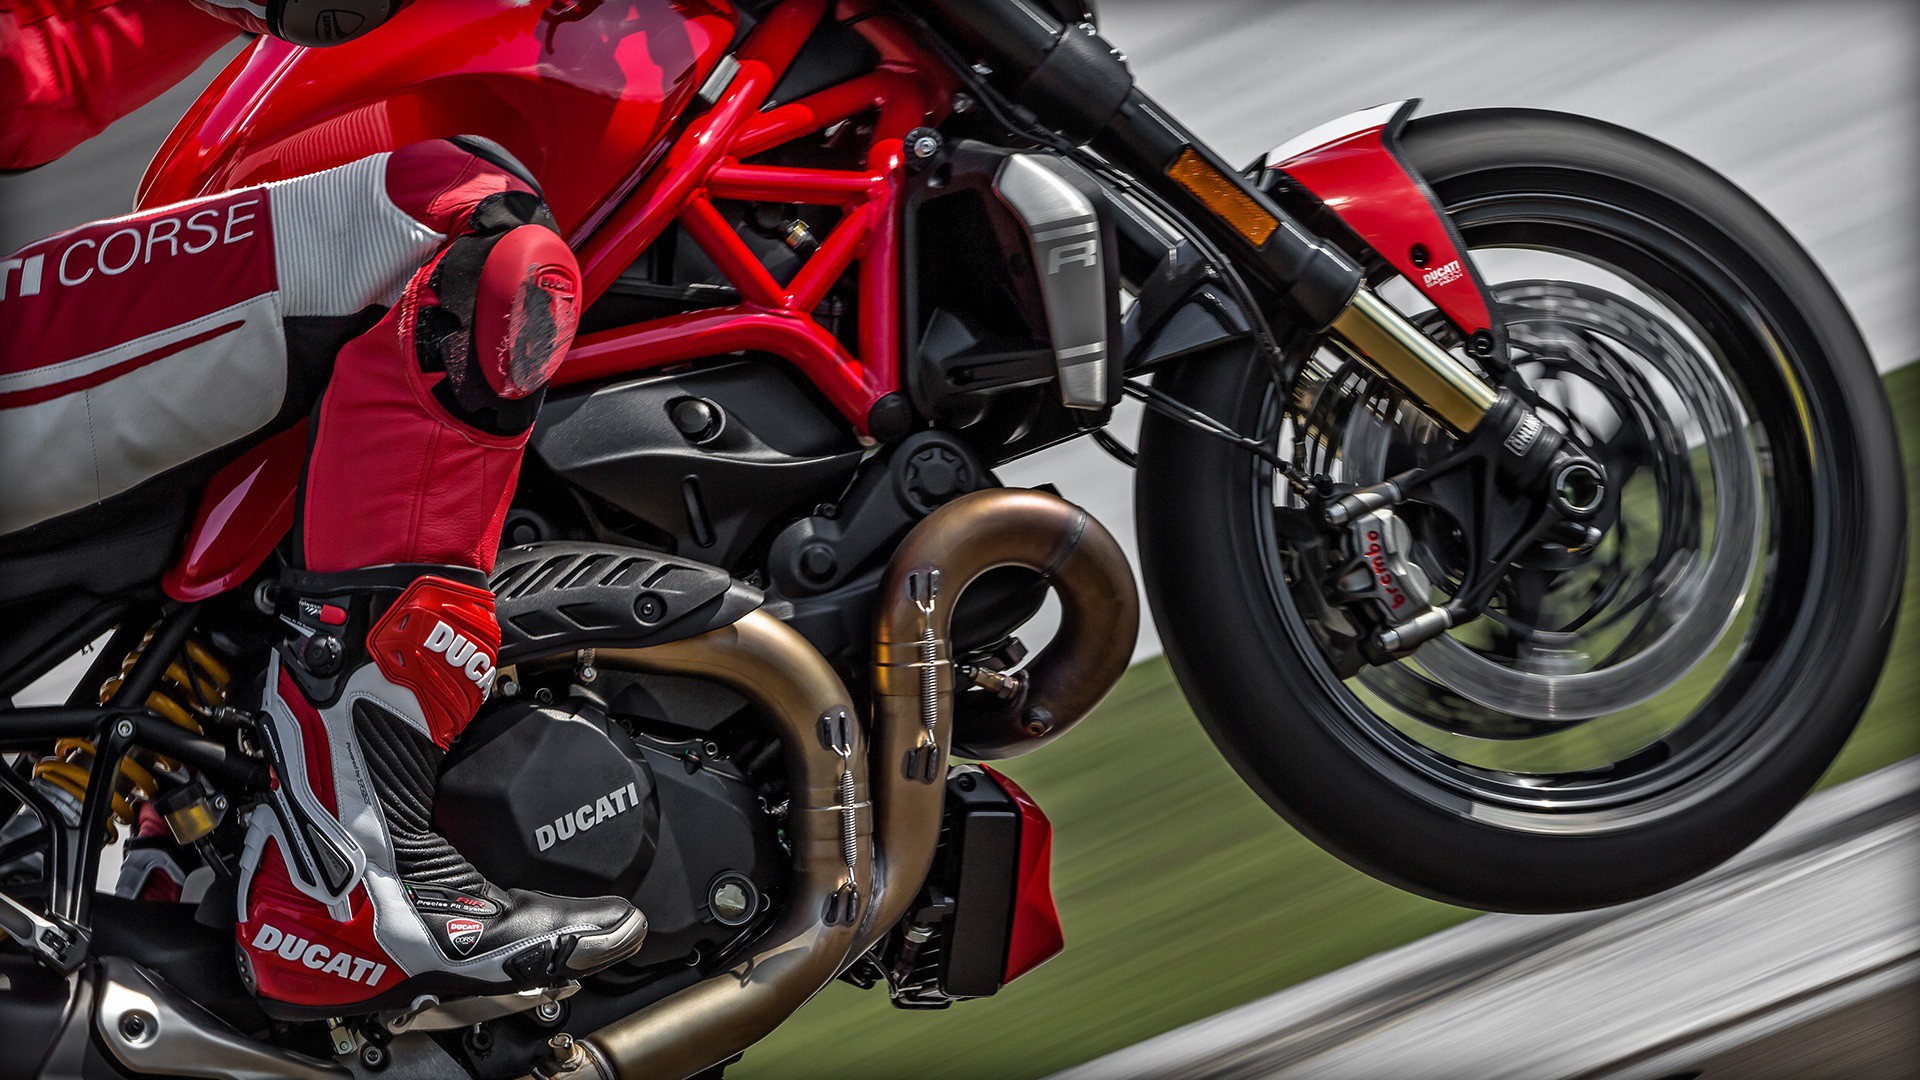 Ducati Monster 1200r - The Most Powerful Ducati Naked